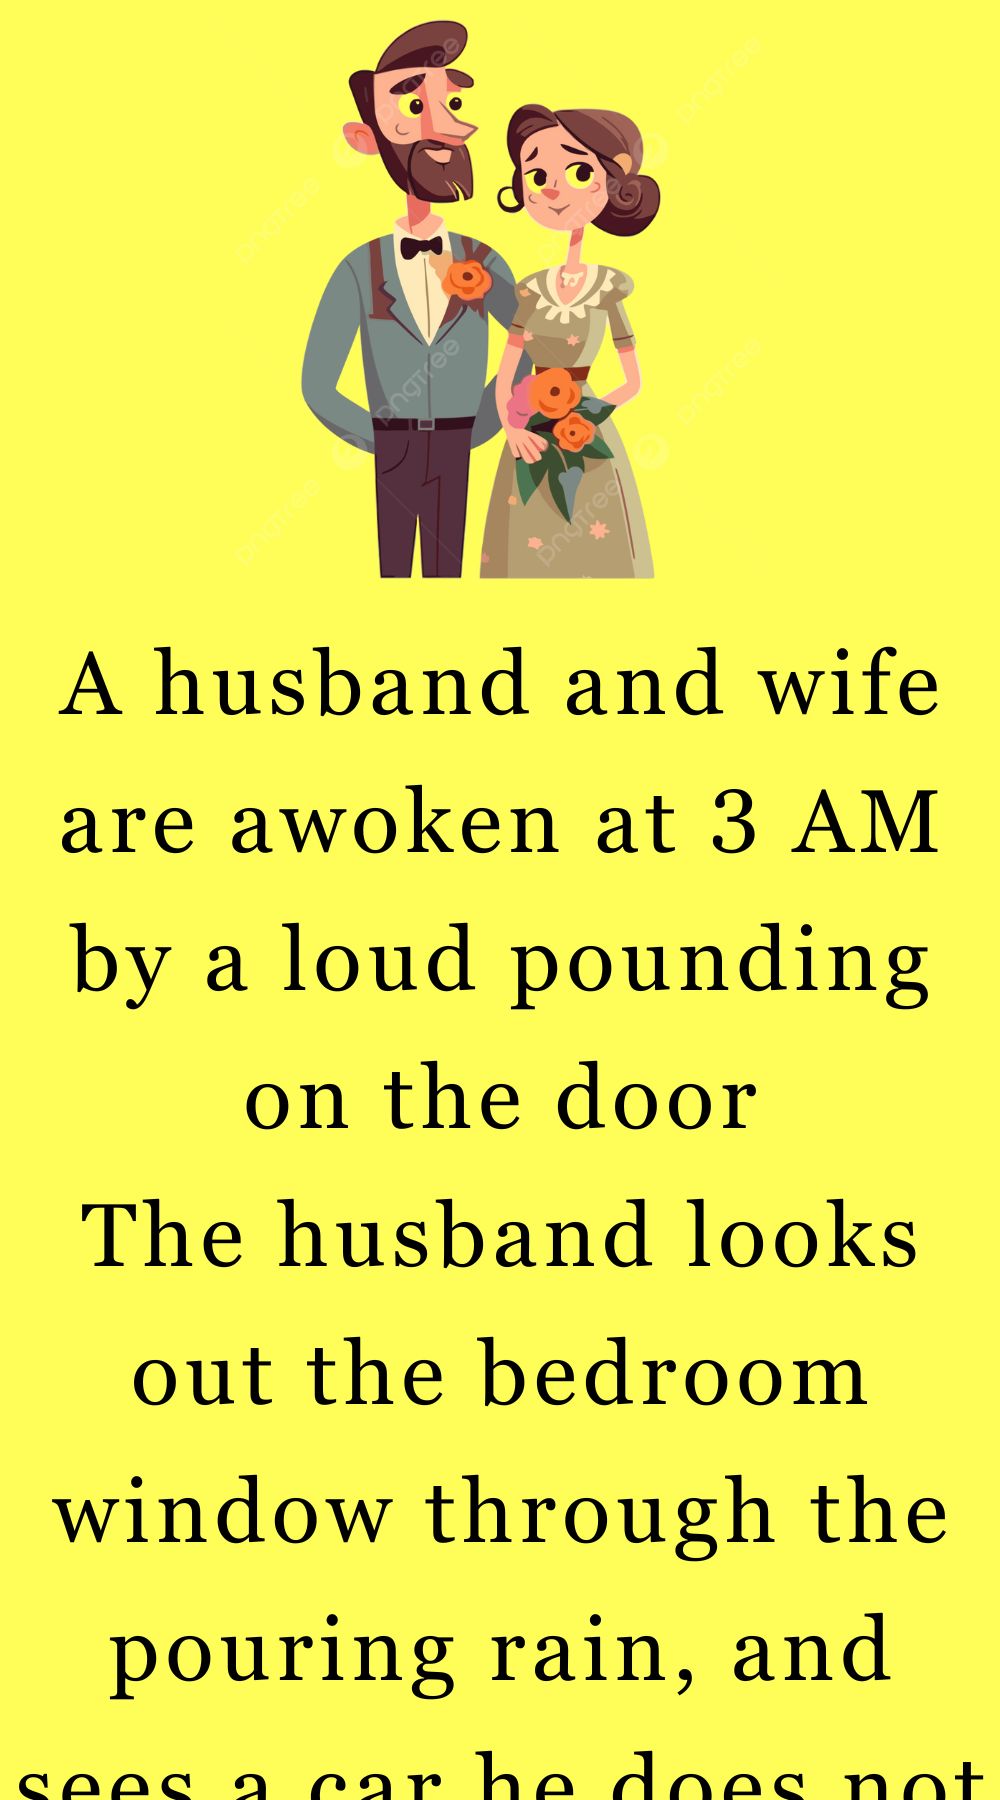 A husband and wife are awoken